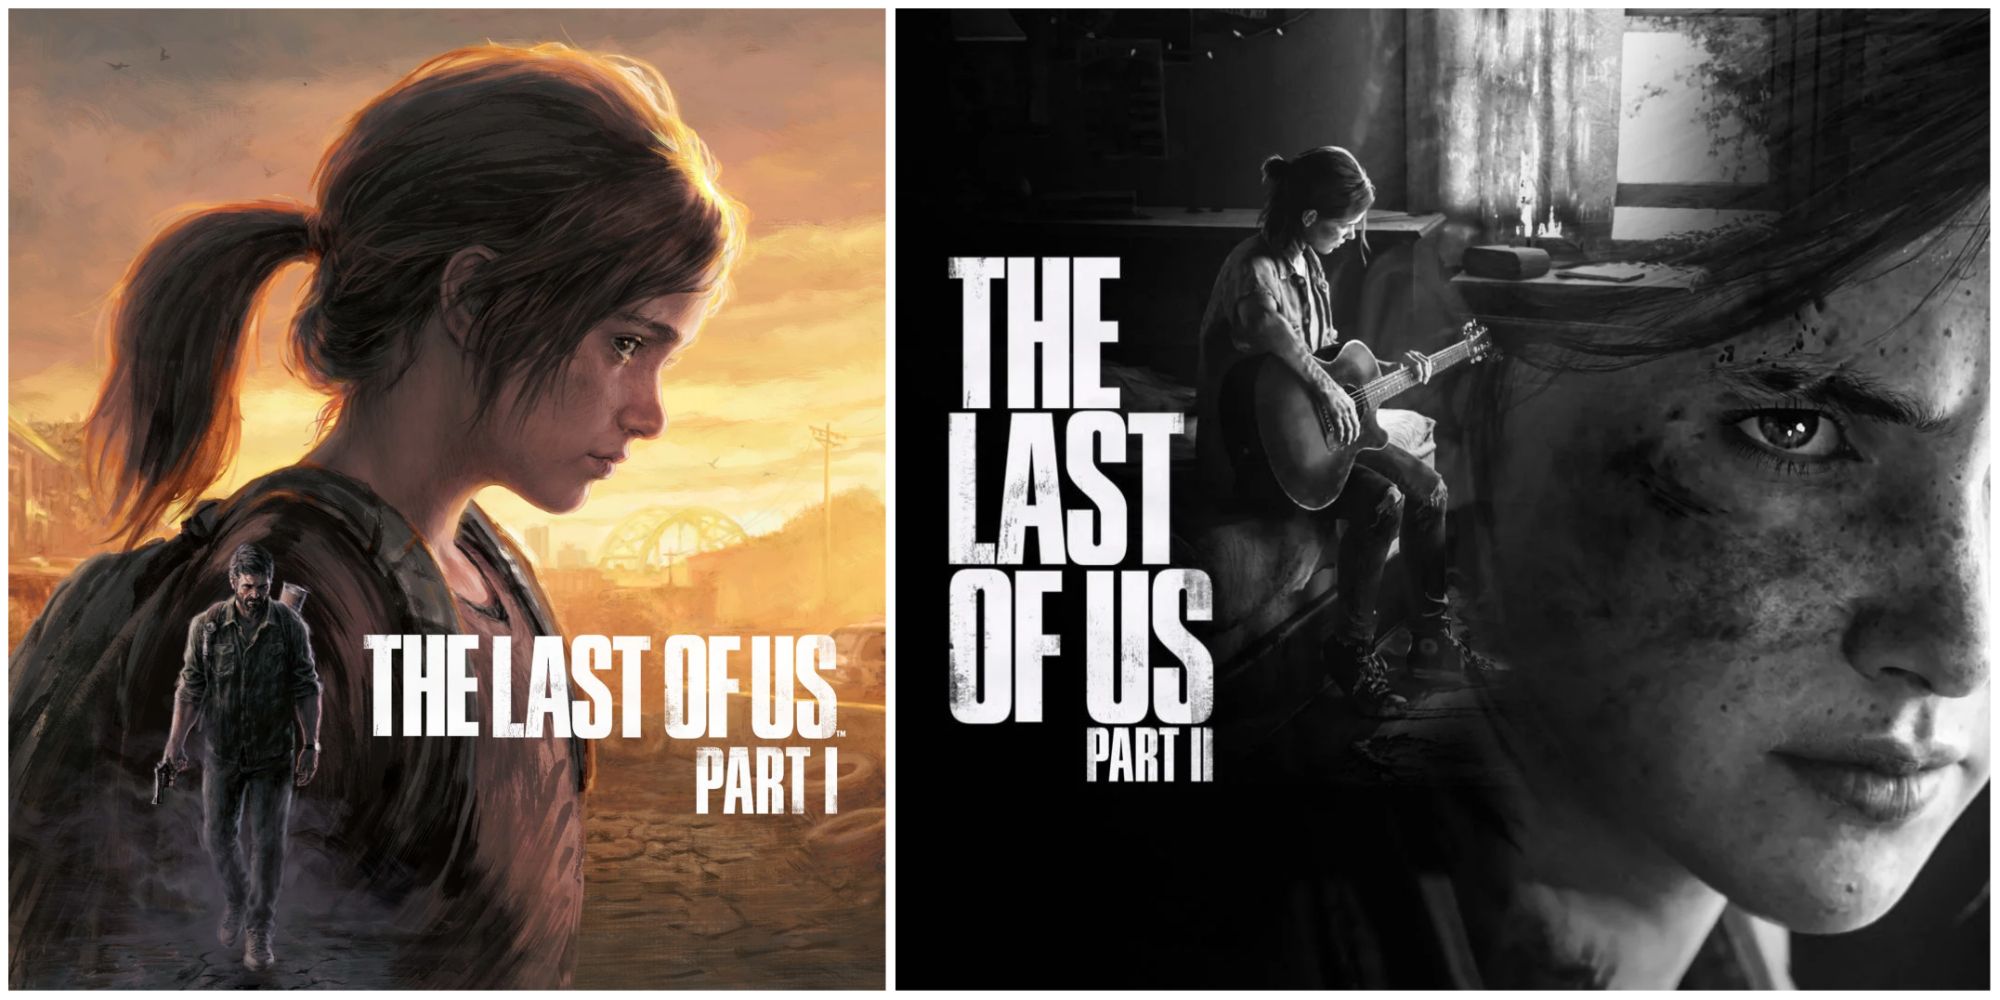 The Last Of Us Part I and Part II cover art